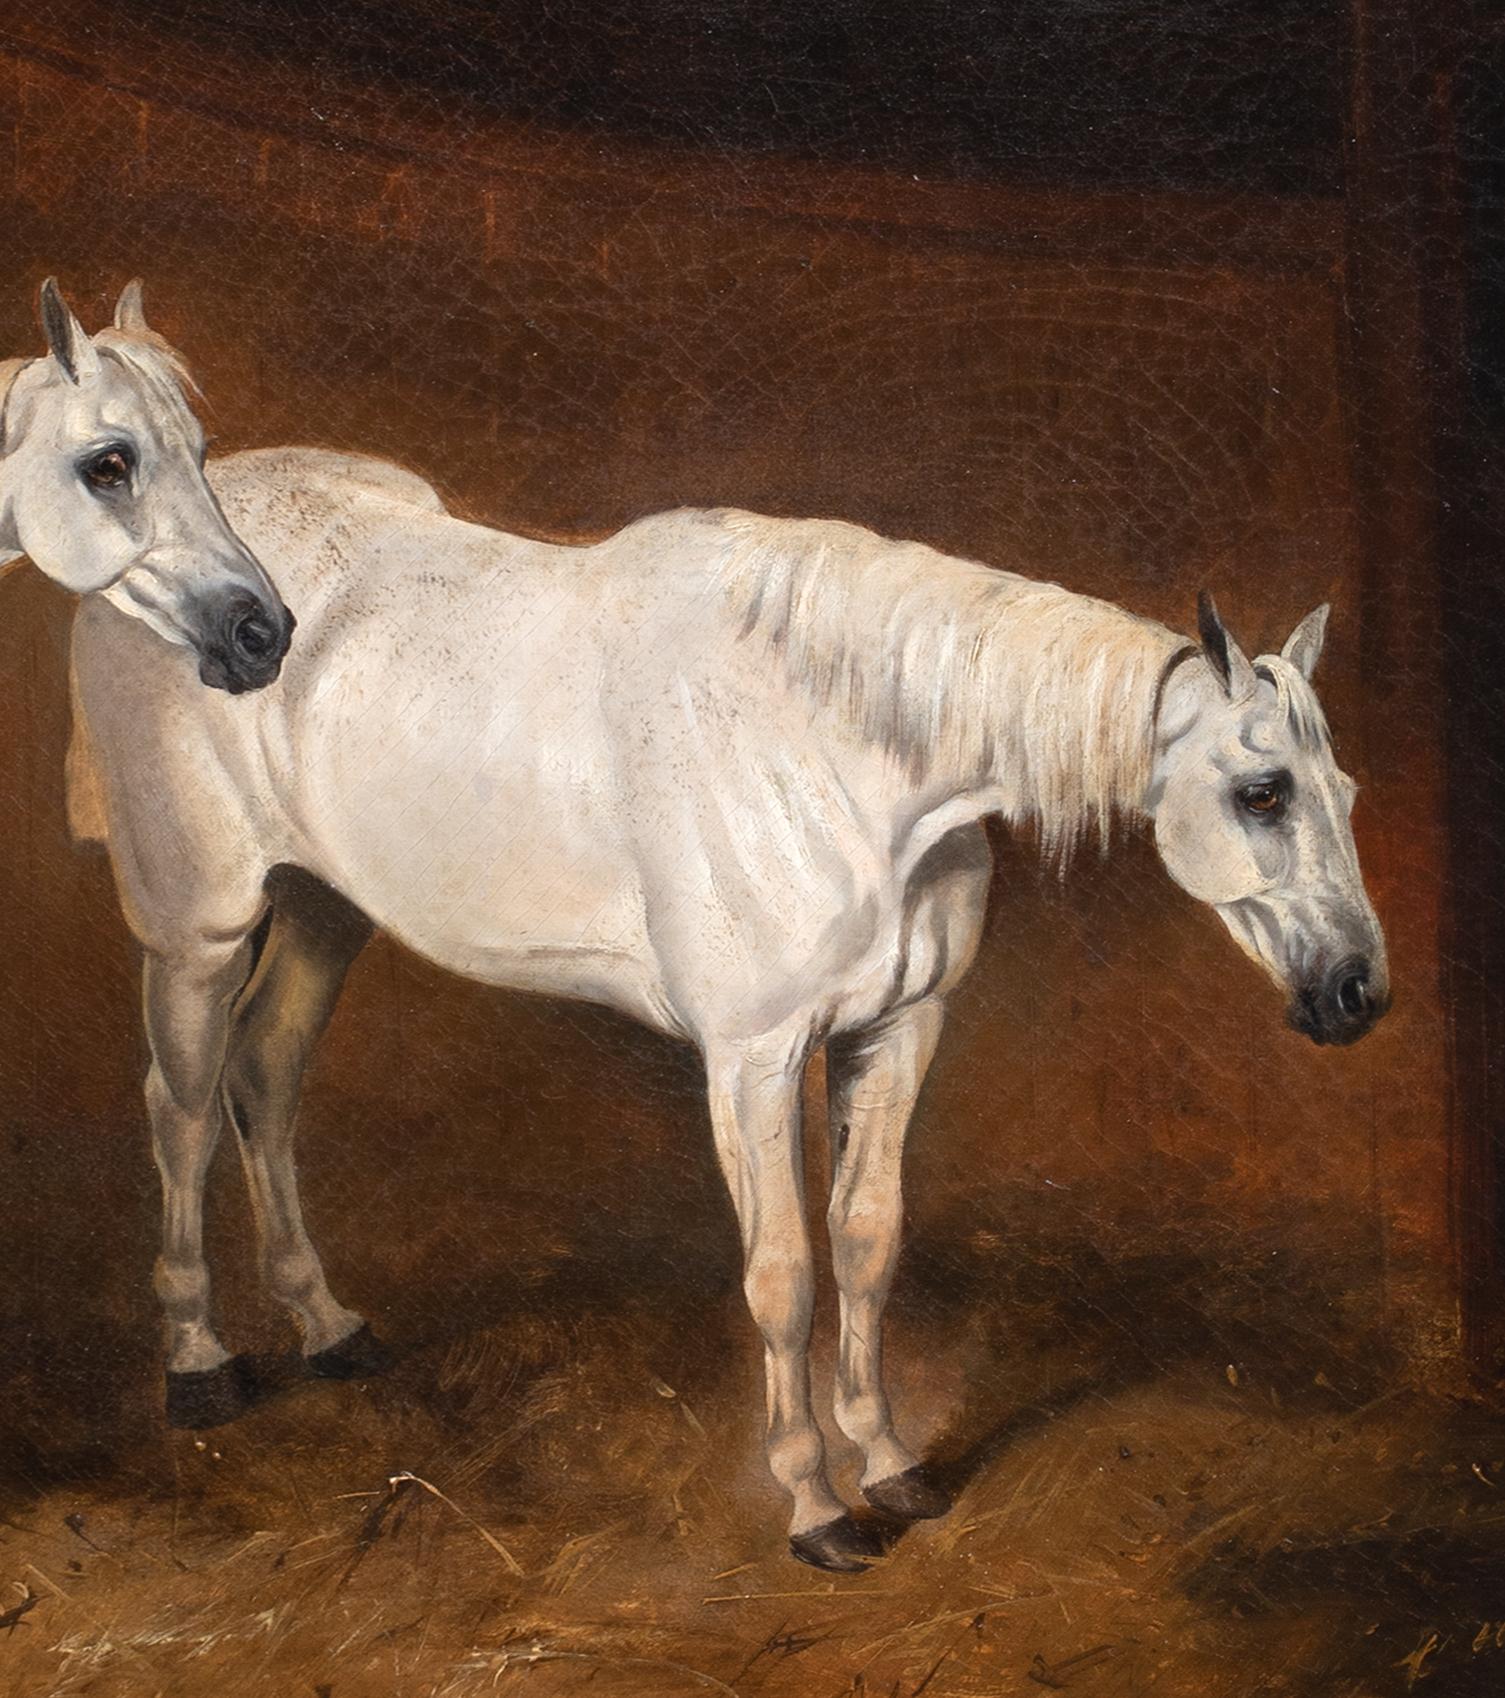 Two White Horses In A Stable, 19th Century

circle of William BARRAUD (1810-1850)

Large 19th Century English stable scene of two white horses, oil on canvas. Excellent quality and condition study presneted in its original antique gilt frame.